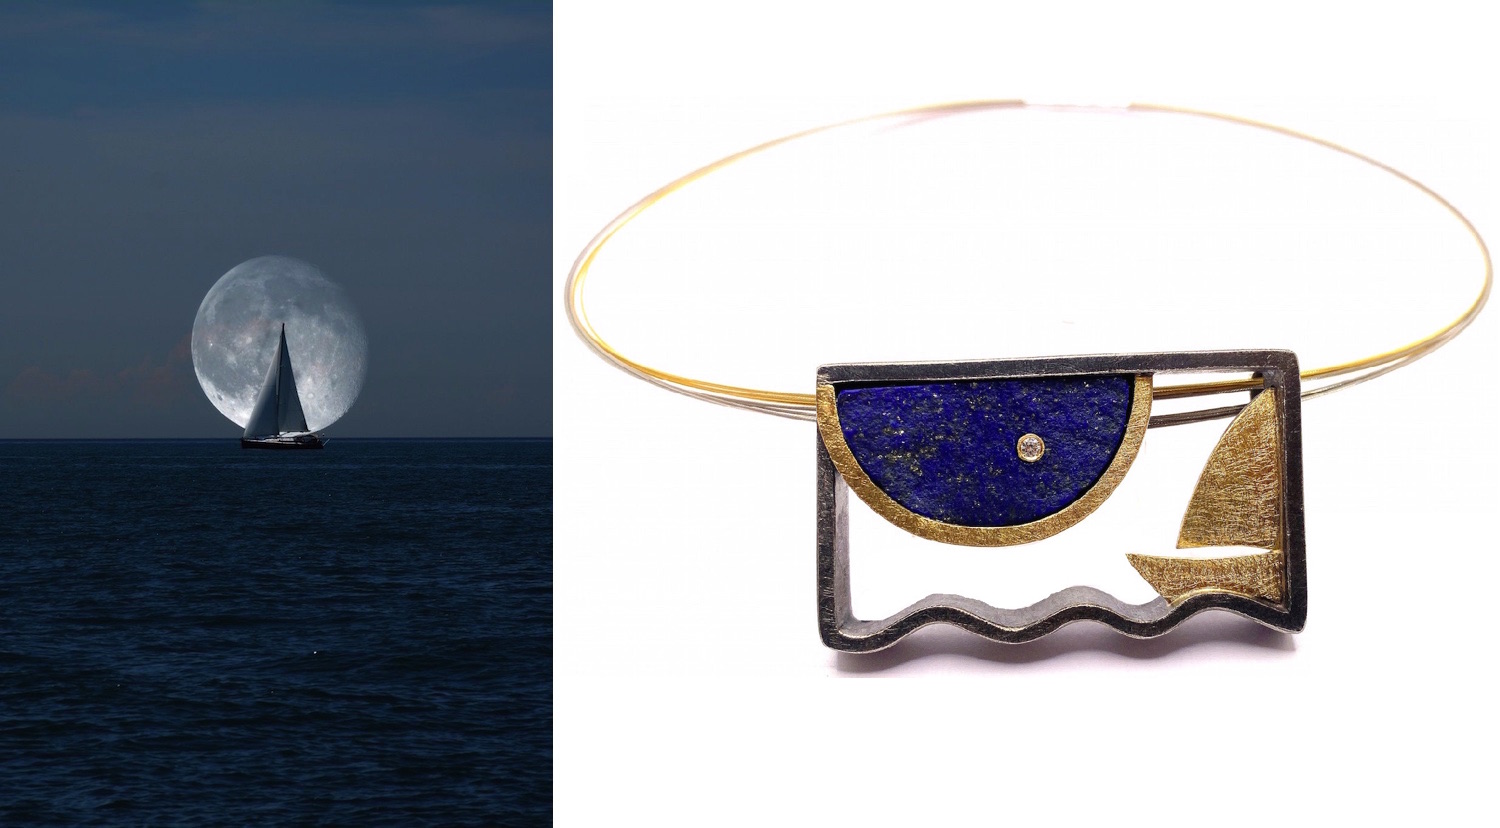 "jewels of the sea" rough lapislazuli sailboat pendant with diamond in silver and gold